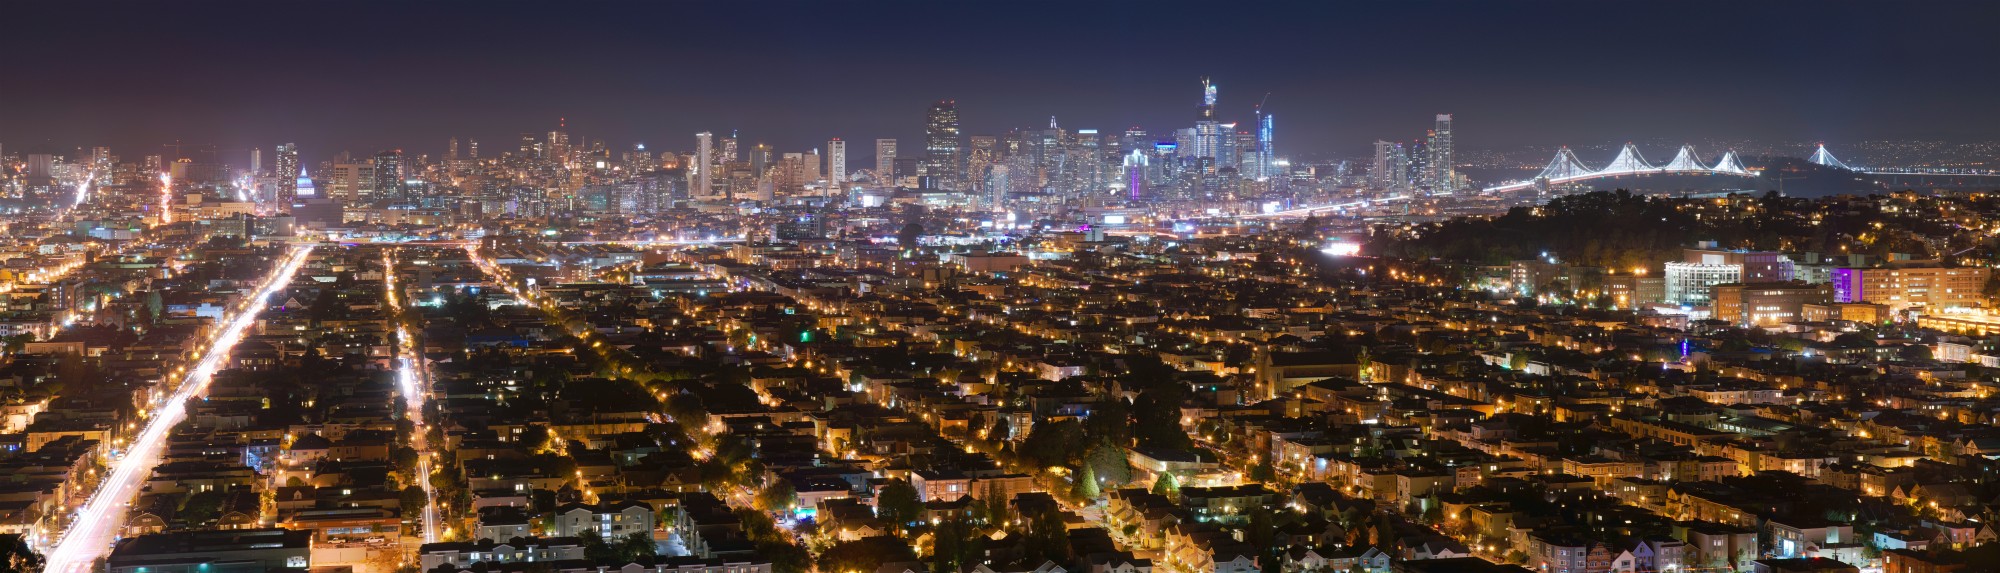 View of San Francisco at night from Bernal Heights 2016 01